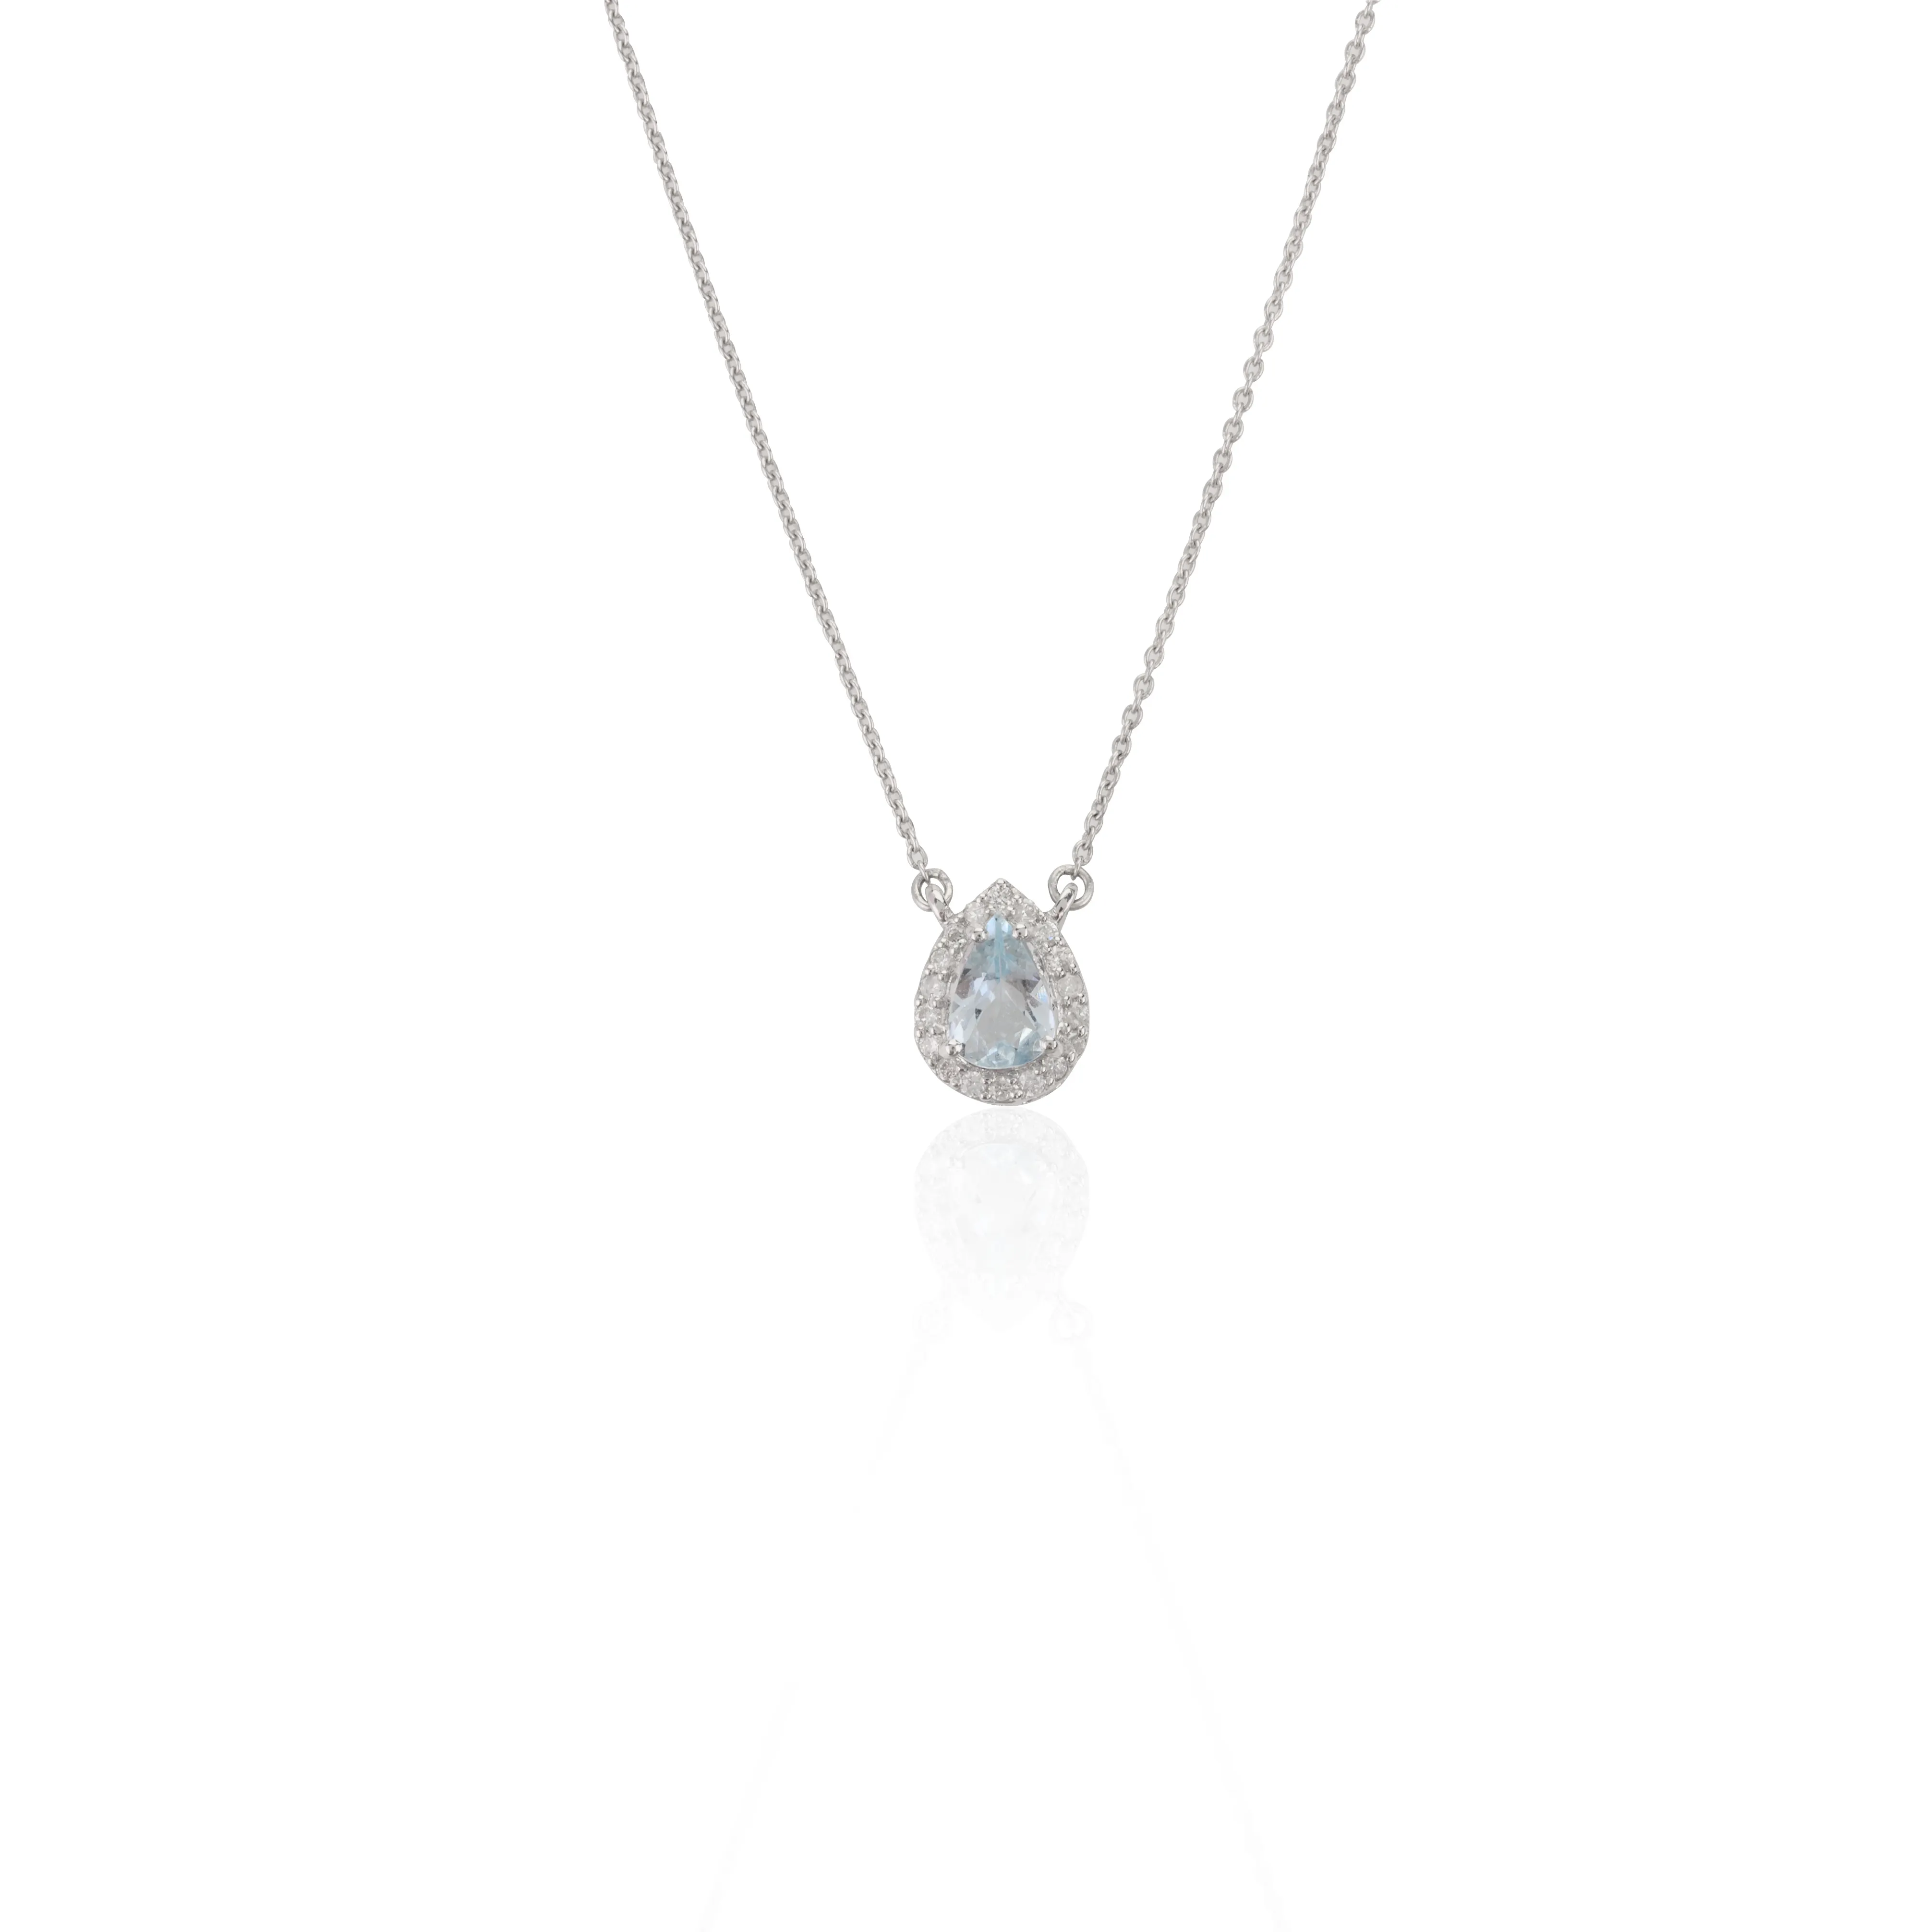 Wholesale Bulk New Fashionable 100% Natural Aquamarine & Diamond Pear Cut Chain Necklace 14k Solid White Gold Jewelry For Women